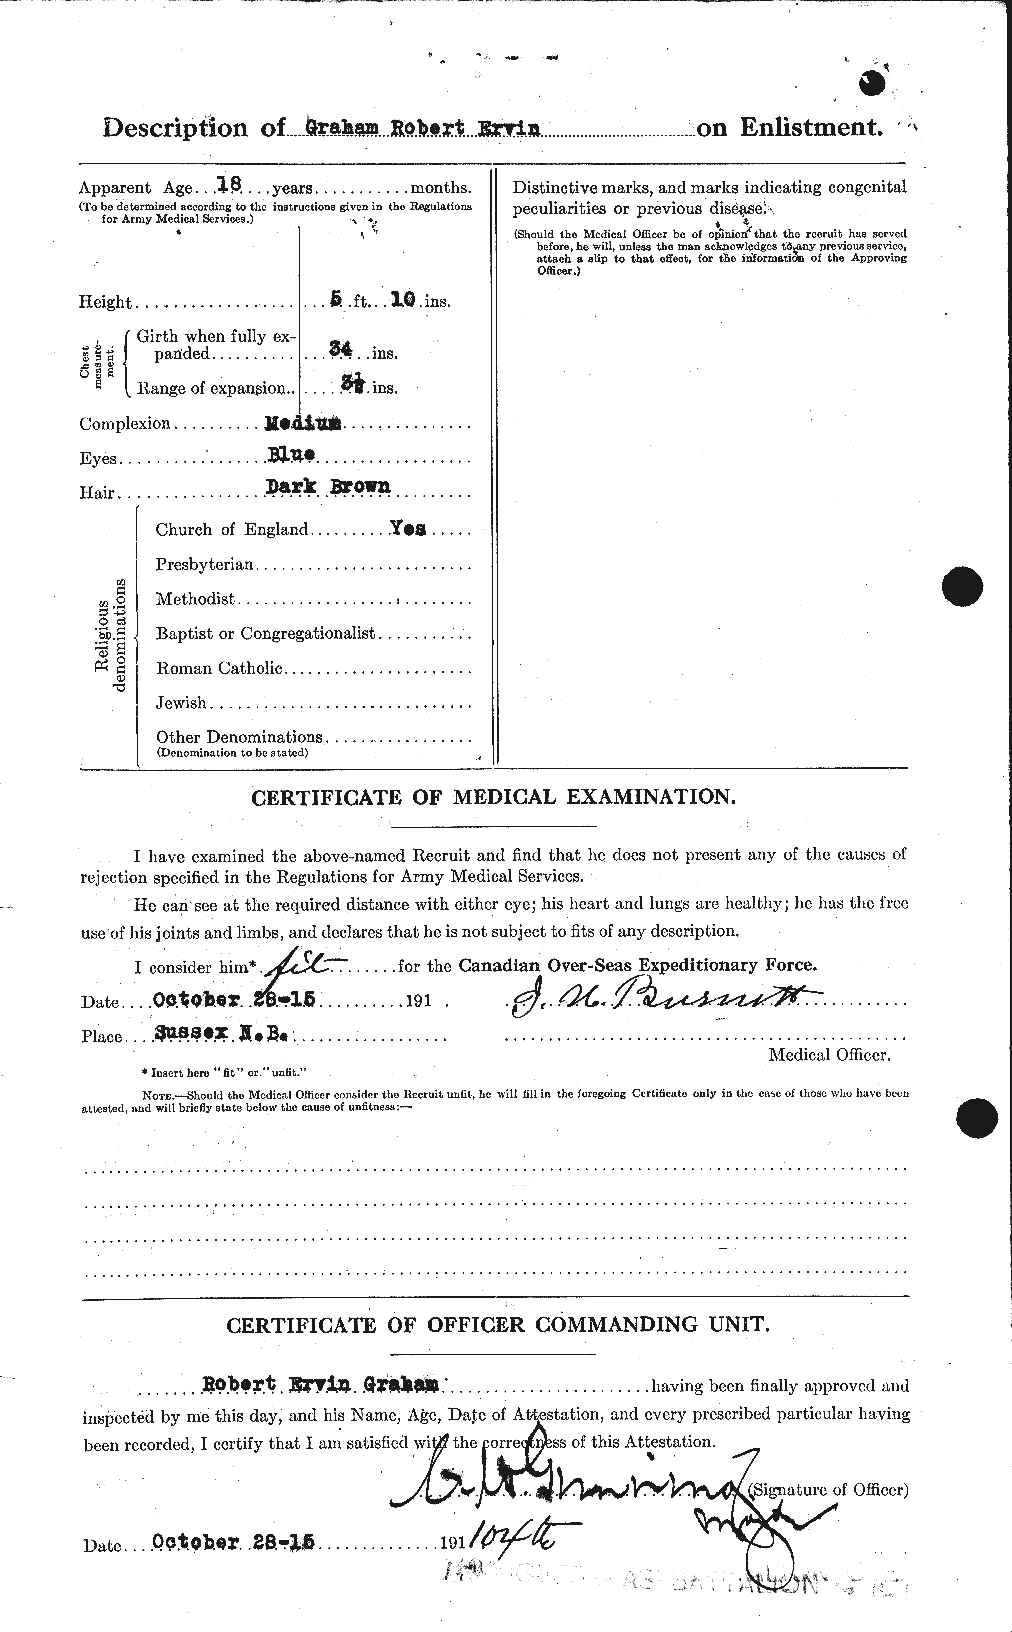 Personnel Records of the First World War - CEF 359401b